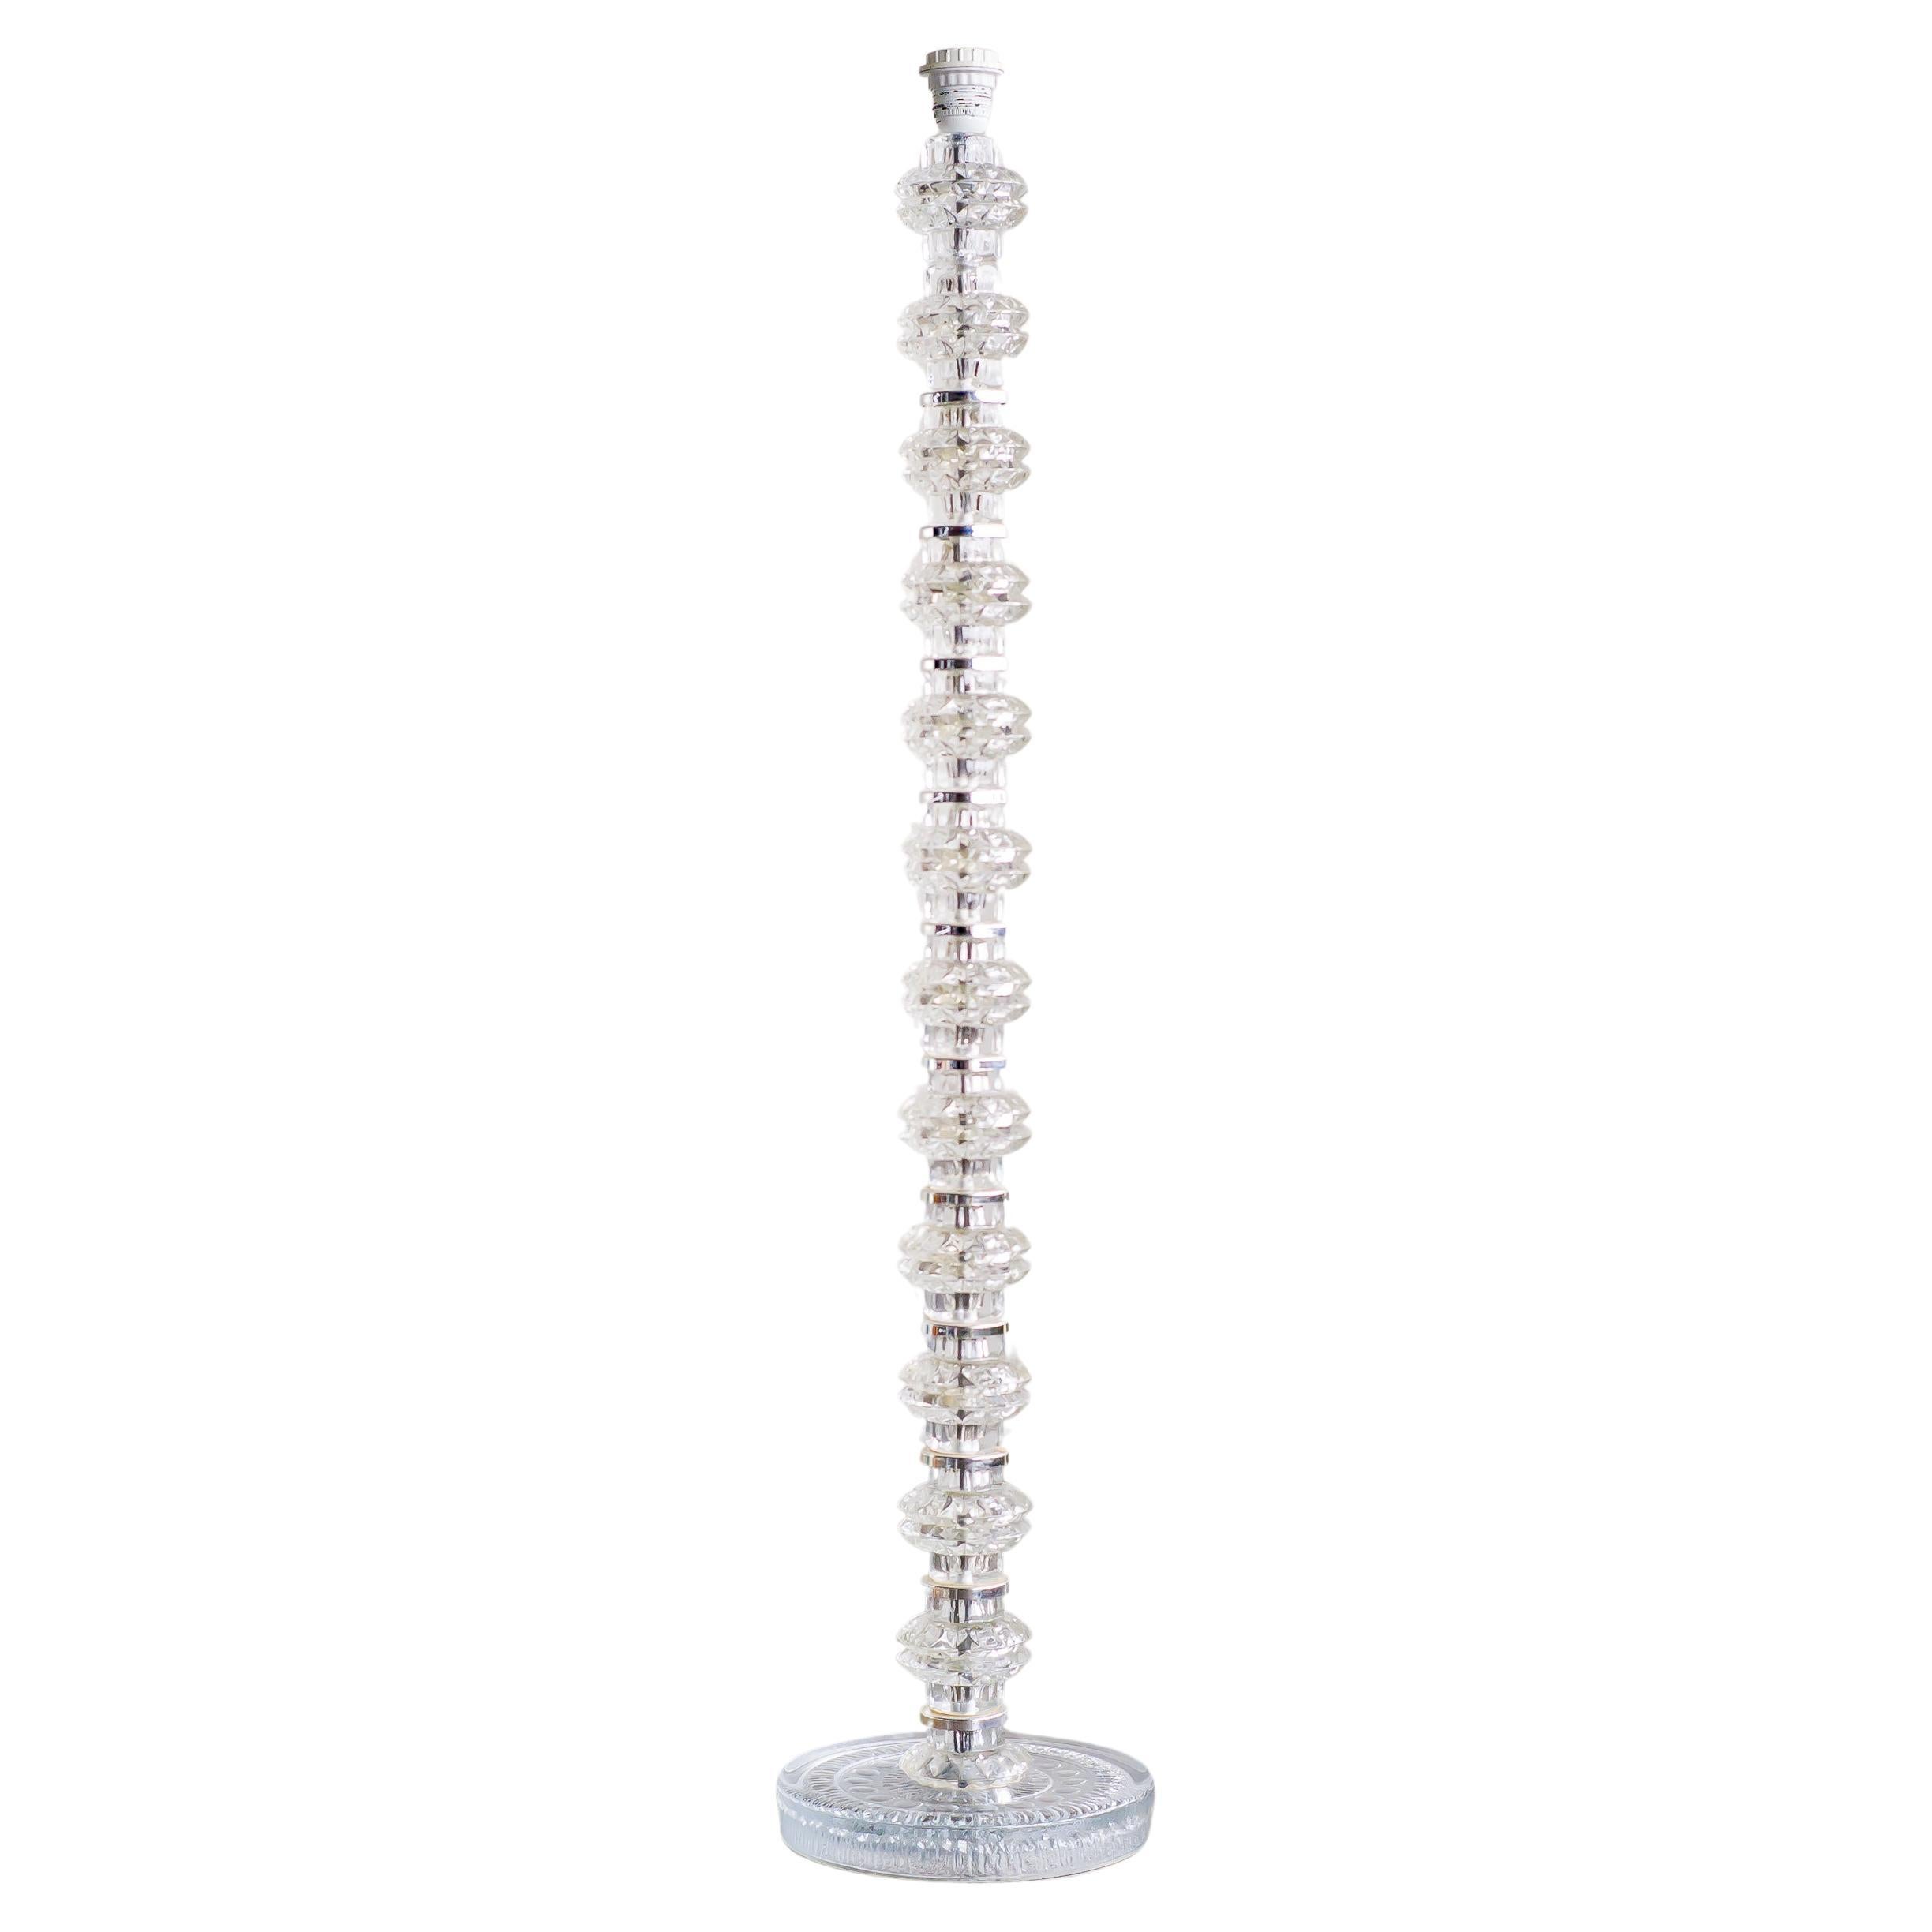 Carl Fagerlund All Chrystal Floor Lamp For Sale